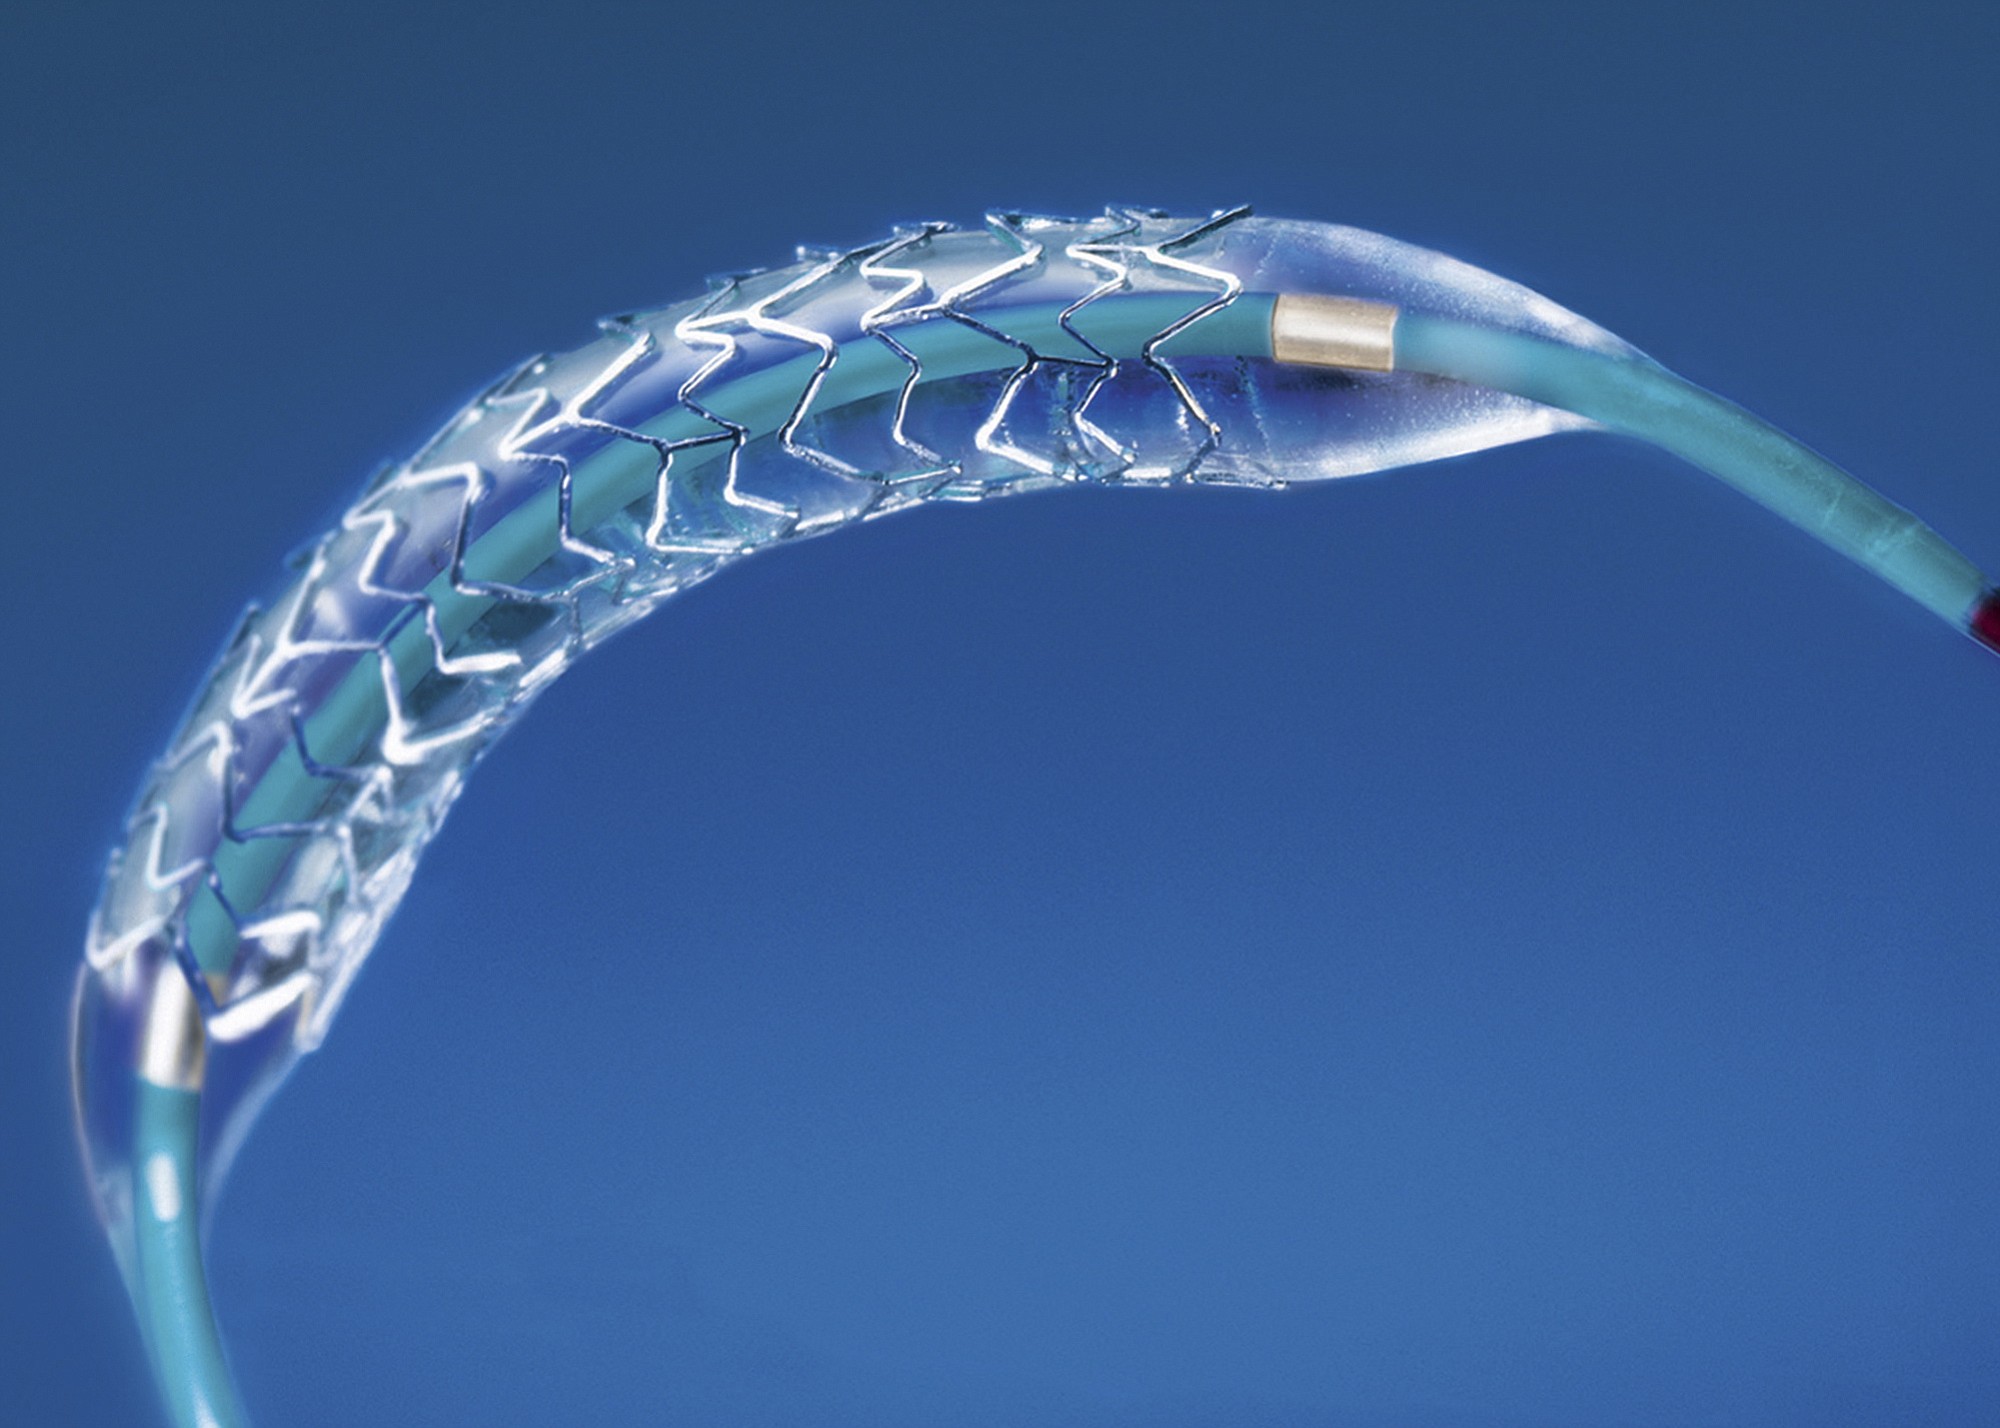 Boston Scientific files
A major study answers a key question facing hundreds of thousands of people each year who get heart stents such as the drug-coated Taxus Express Paclitaxel Eluding Coronary Stent System to prop open clogged arteries.